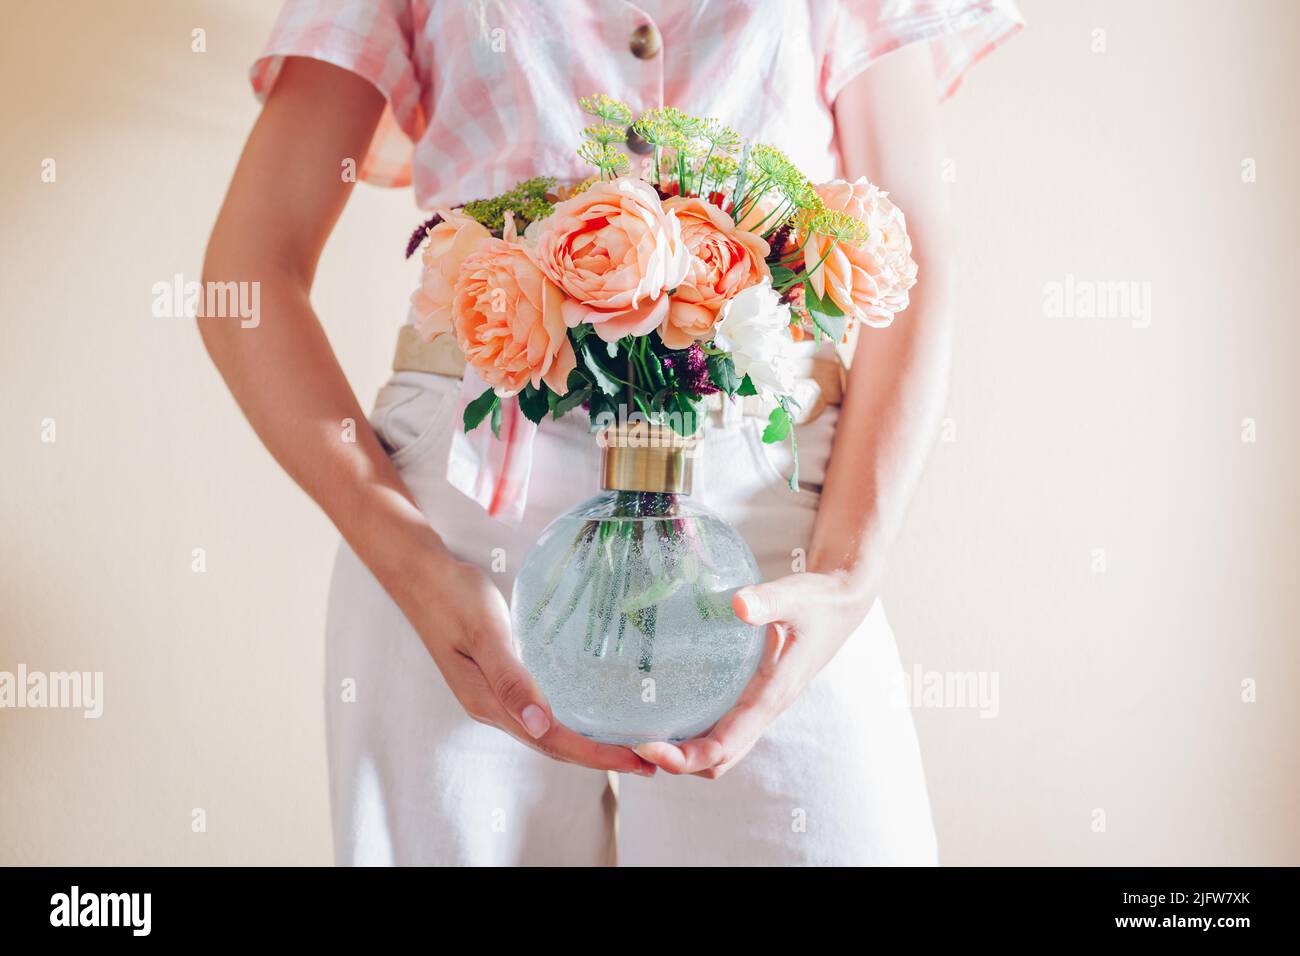 Close up of summer bouquet of flowers in transparent glass vase. Woman florist holds arrangement with orange roses Stock Photo